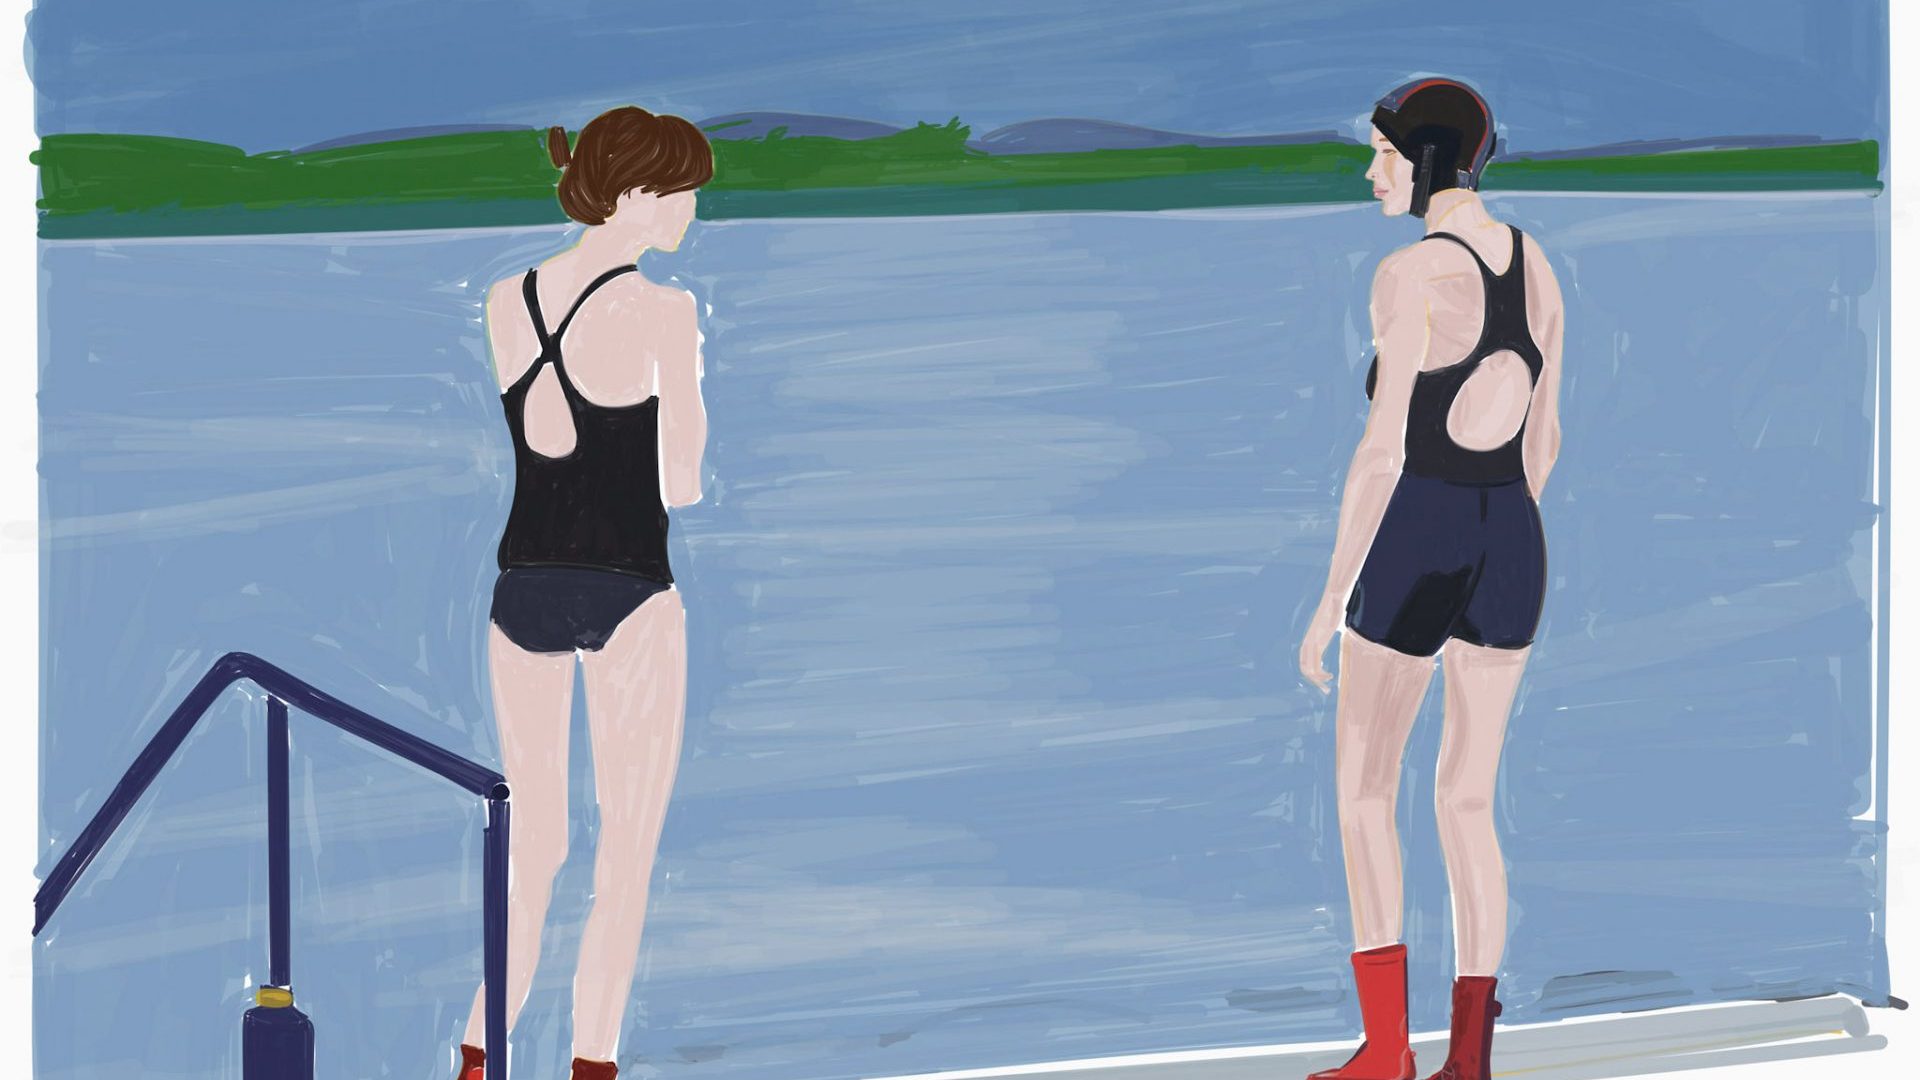 Swimsuit ladies Clara 
and Fiona from the book Dubliners (Image: Mario Sughi)